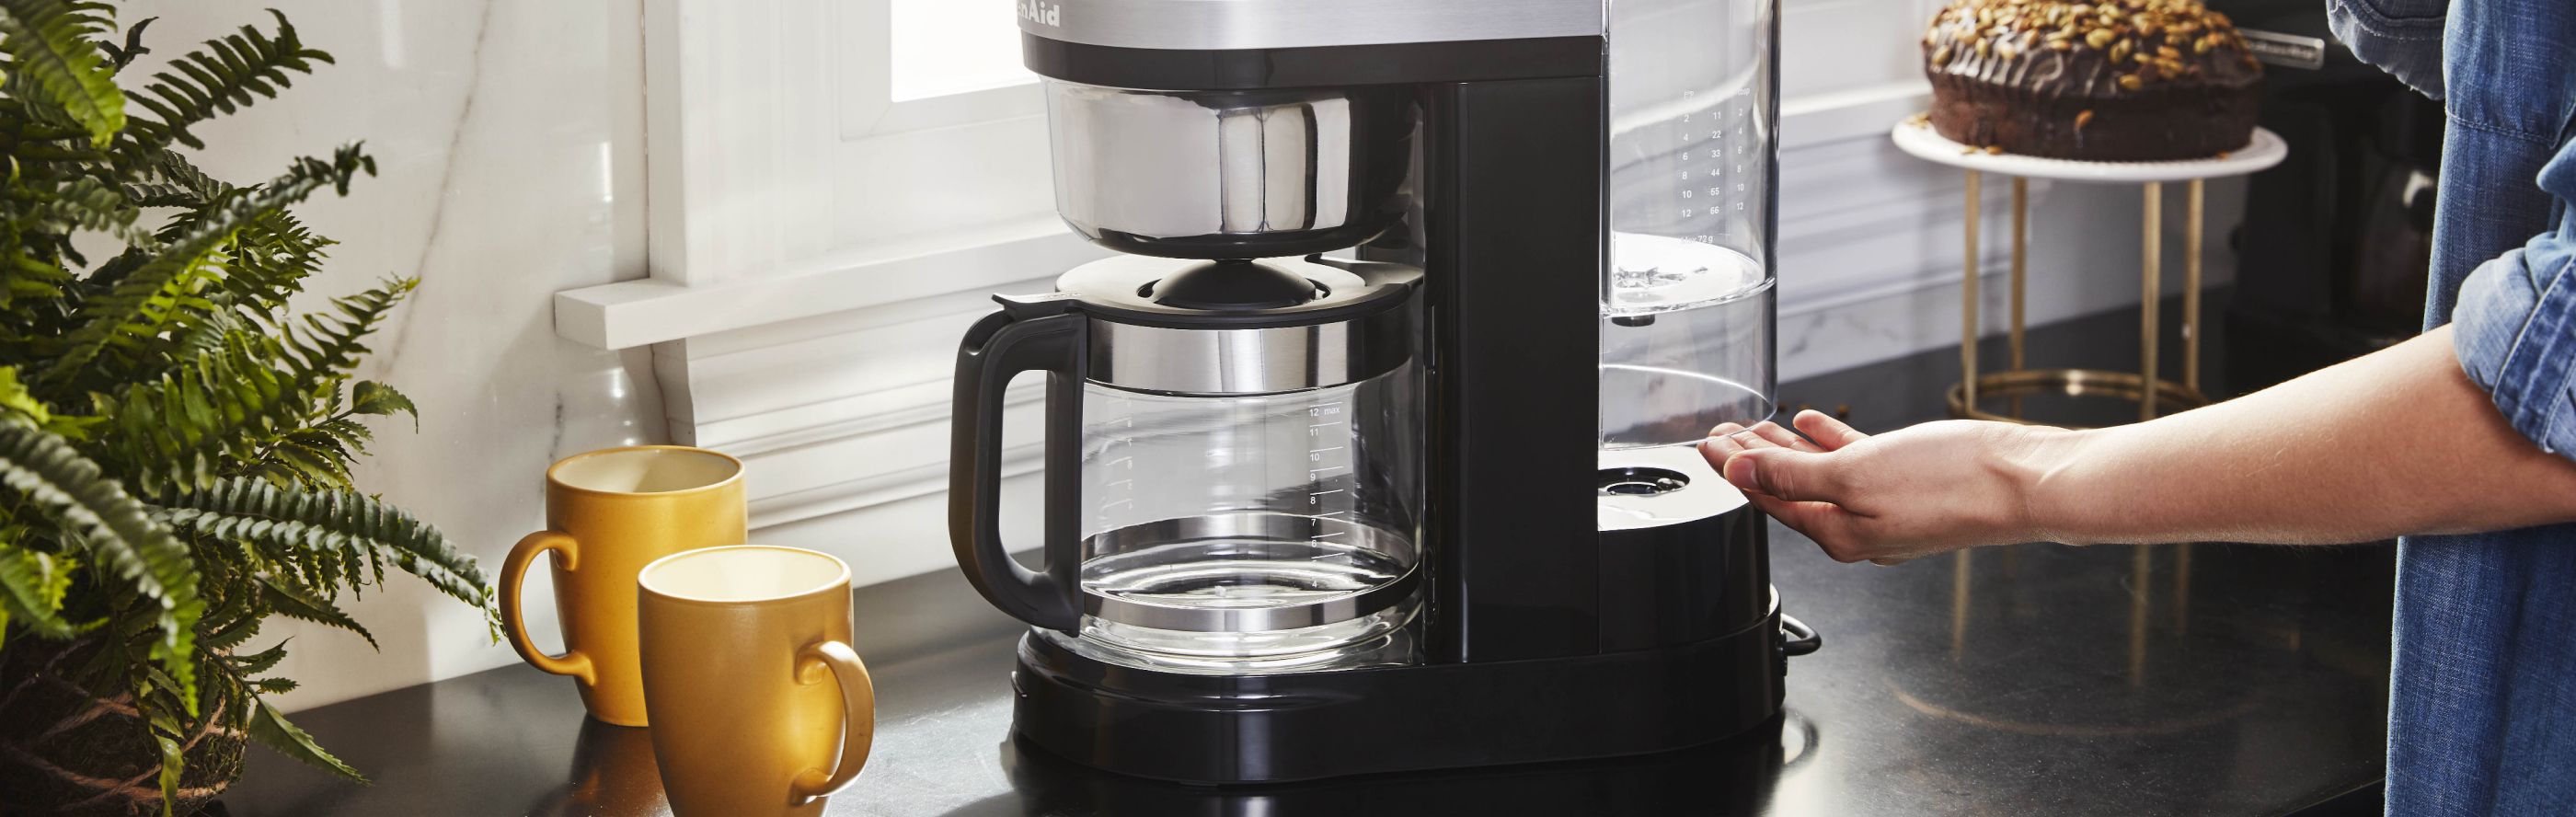 Woman removing water tank from KitchenAid® drip coffee maker